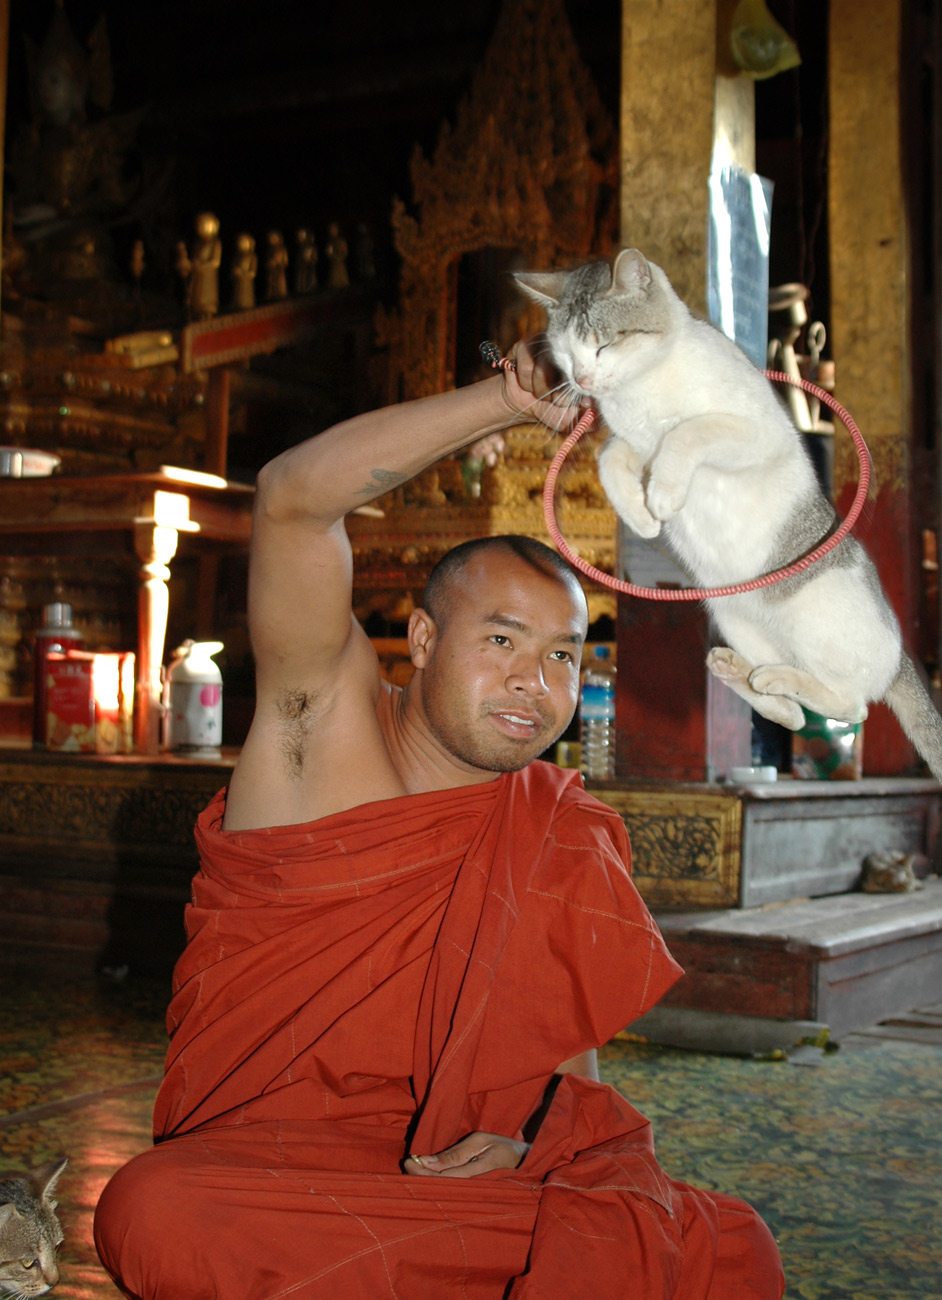 Nga Hpe Chaung monastery known as Jumping cat monastery, Inle Lake, 2005